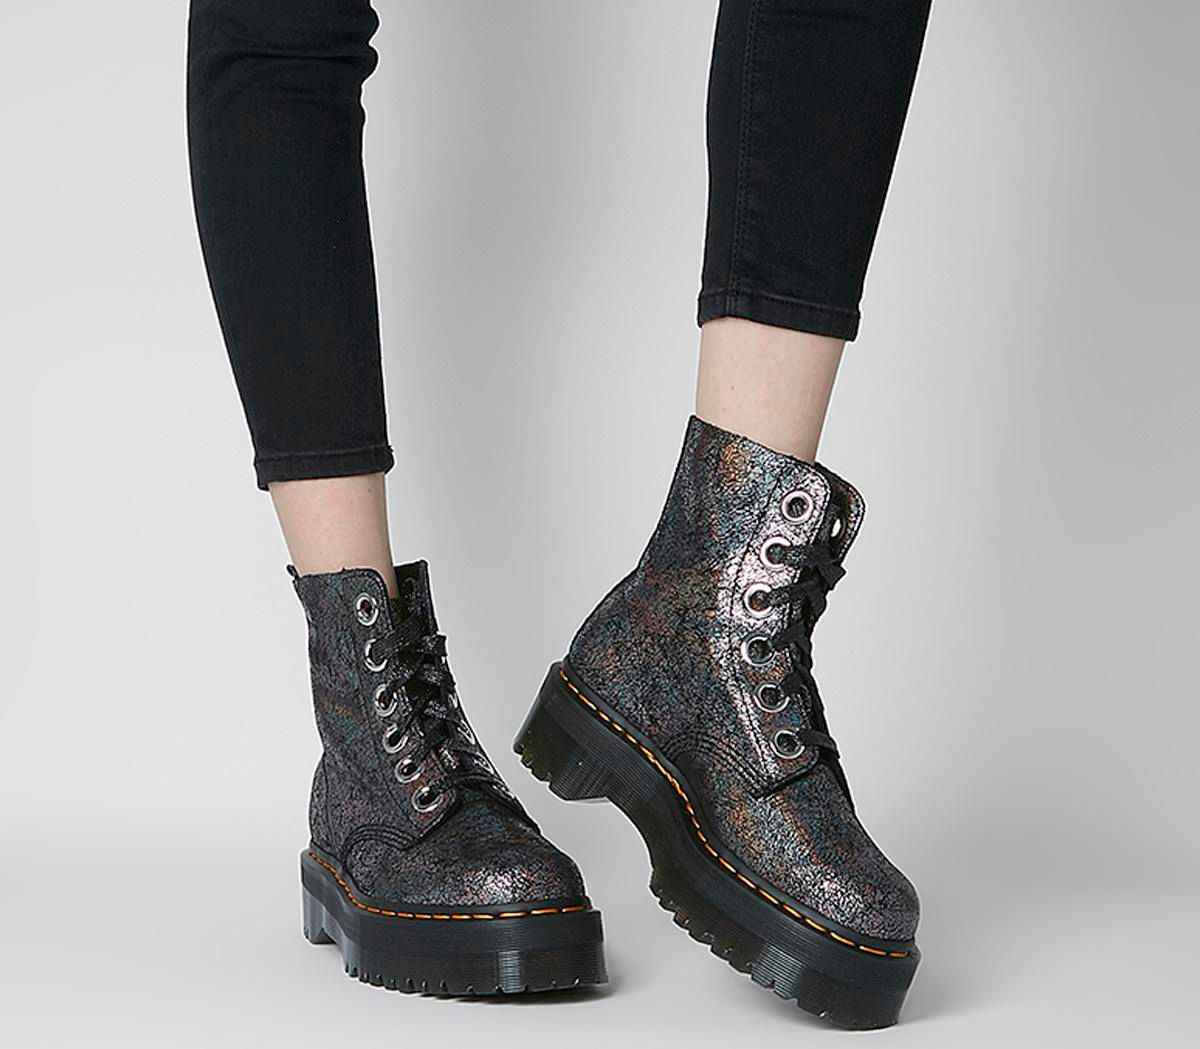 Dr. Martens Molly Boot GUNMETAL GREY CRACKED IRIDESCENT | Compare